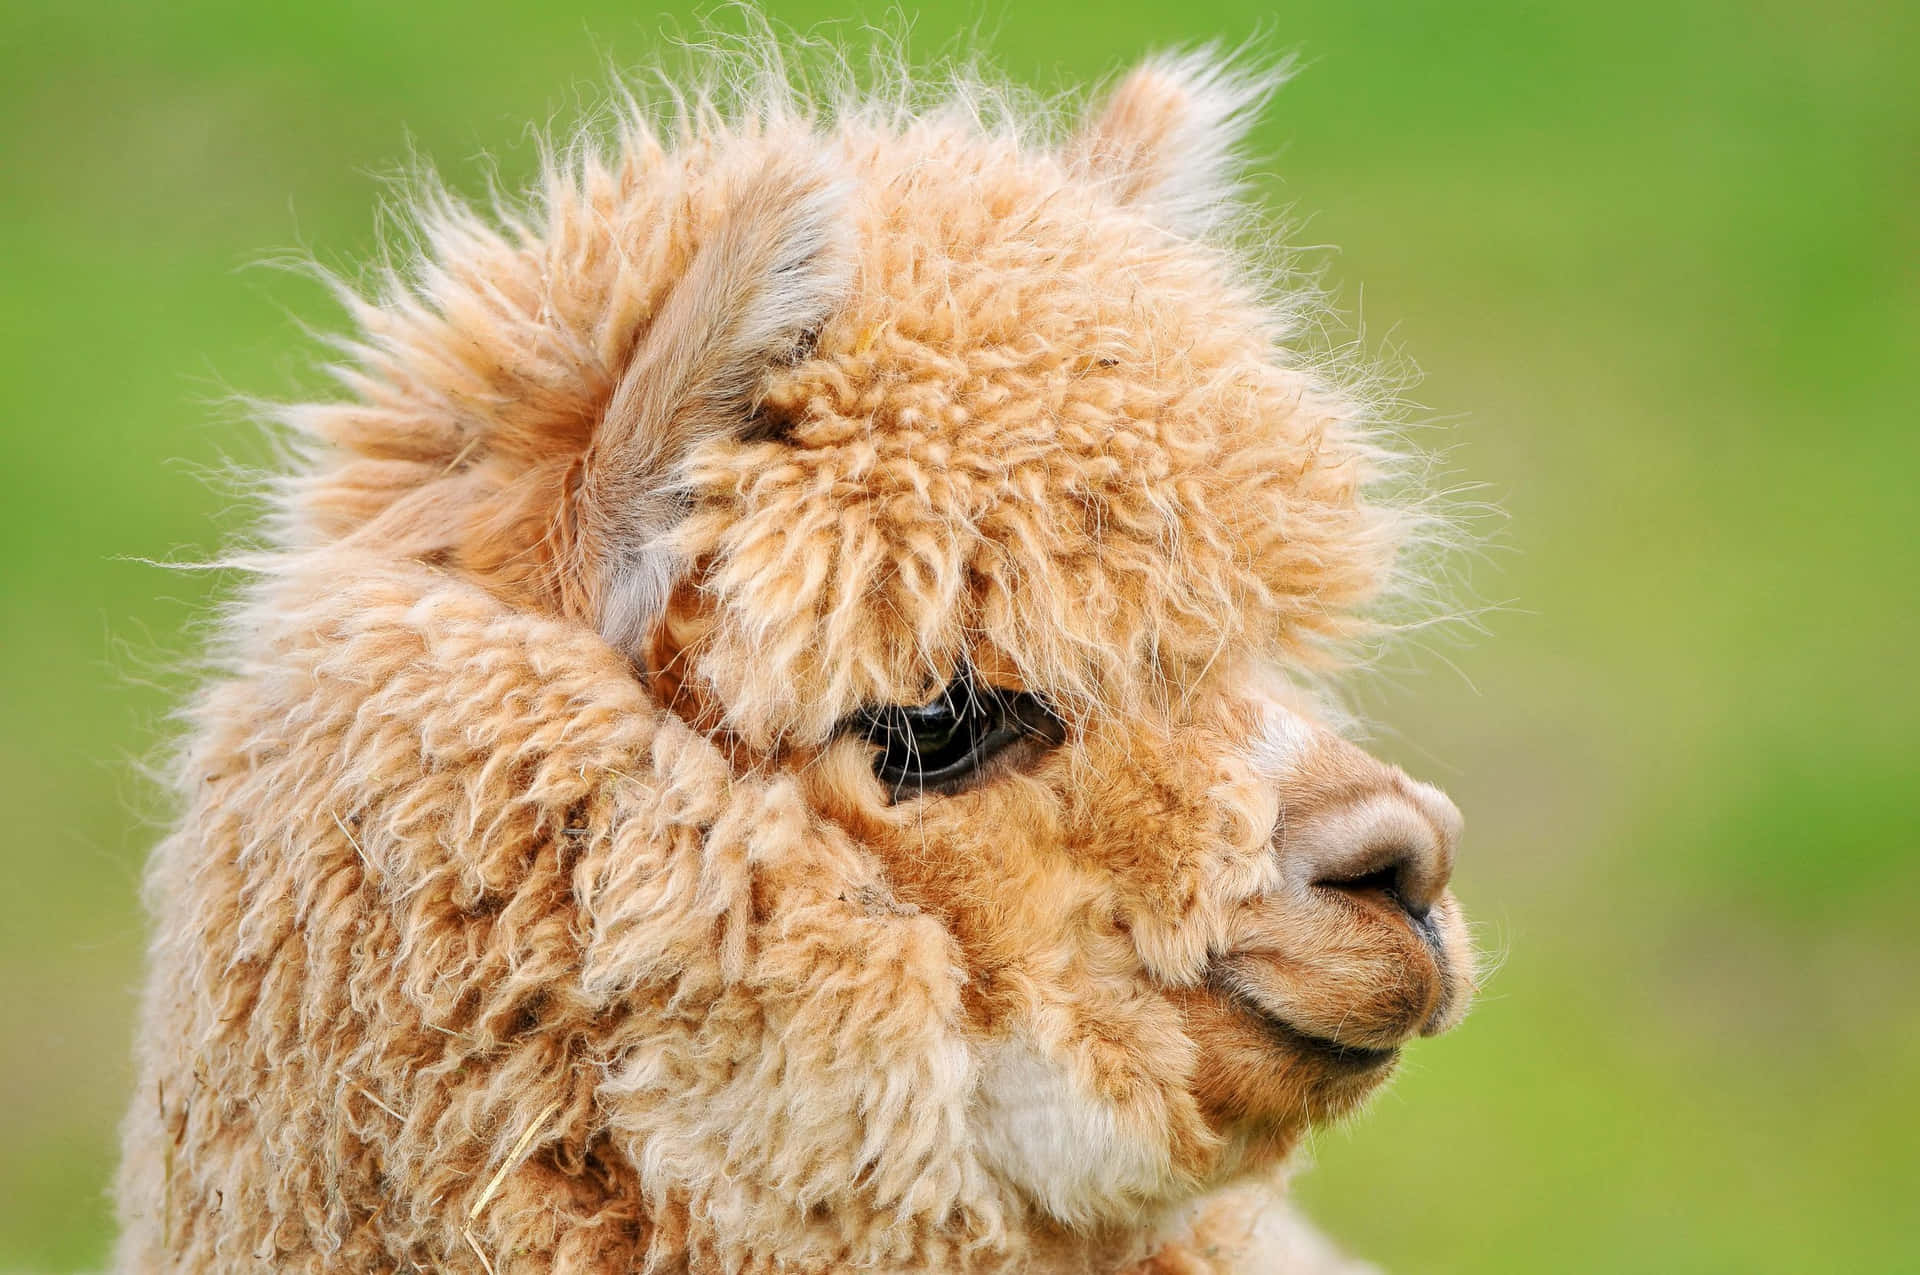 Image  Playful alpaca showing off its impressive natural beauty